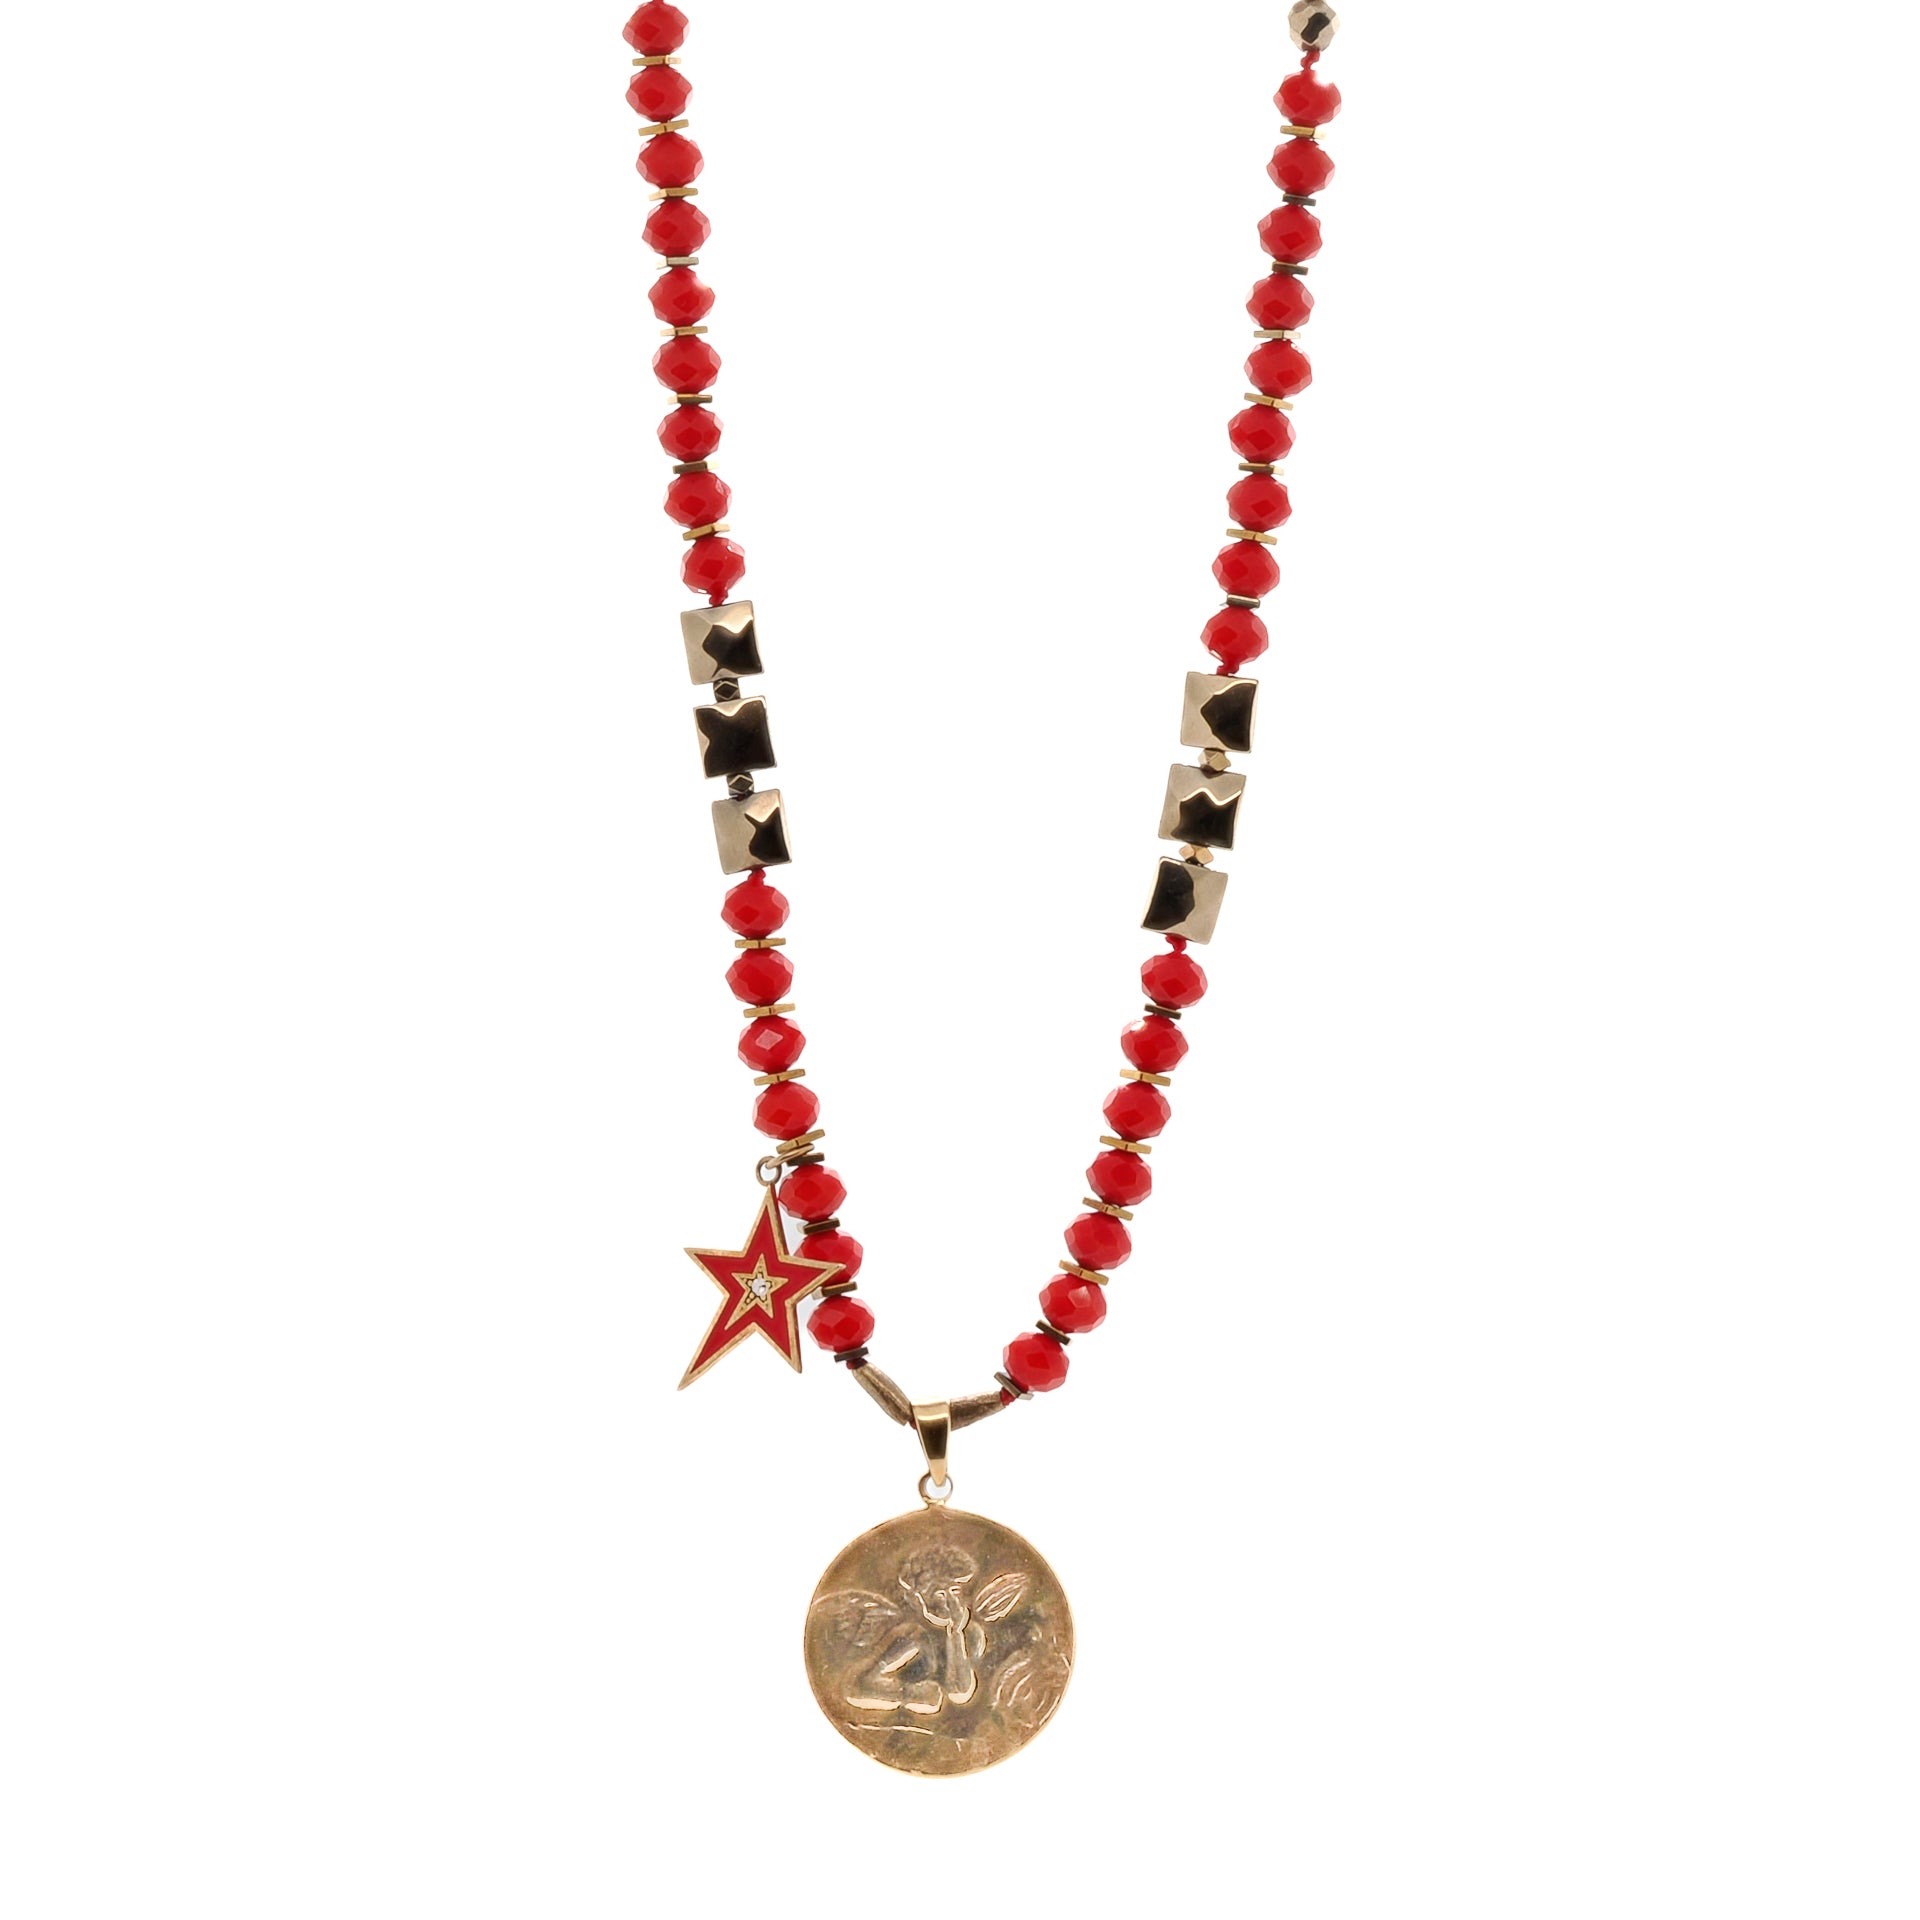 Add a touch of elegance and protection to your outfit with the Angel Protector Necklace